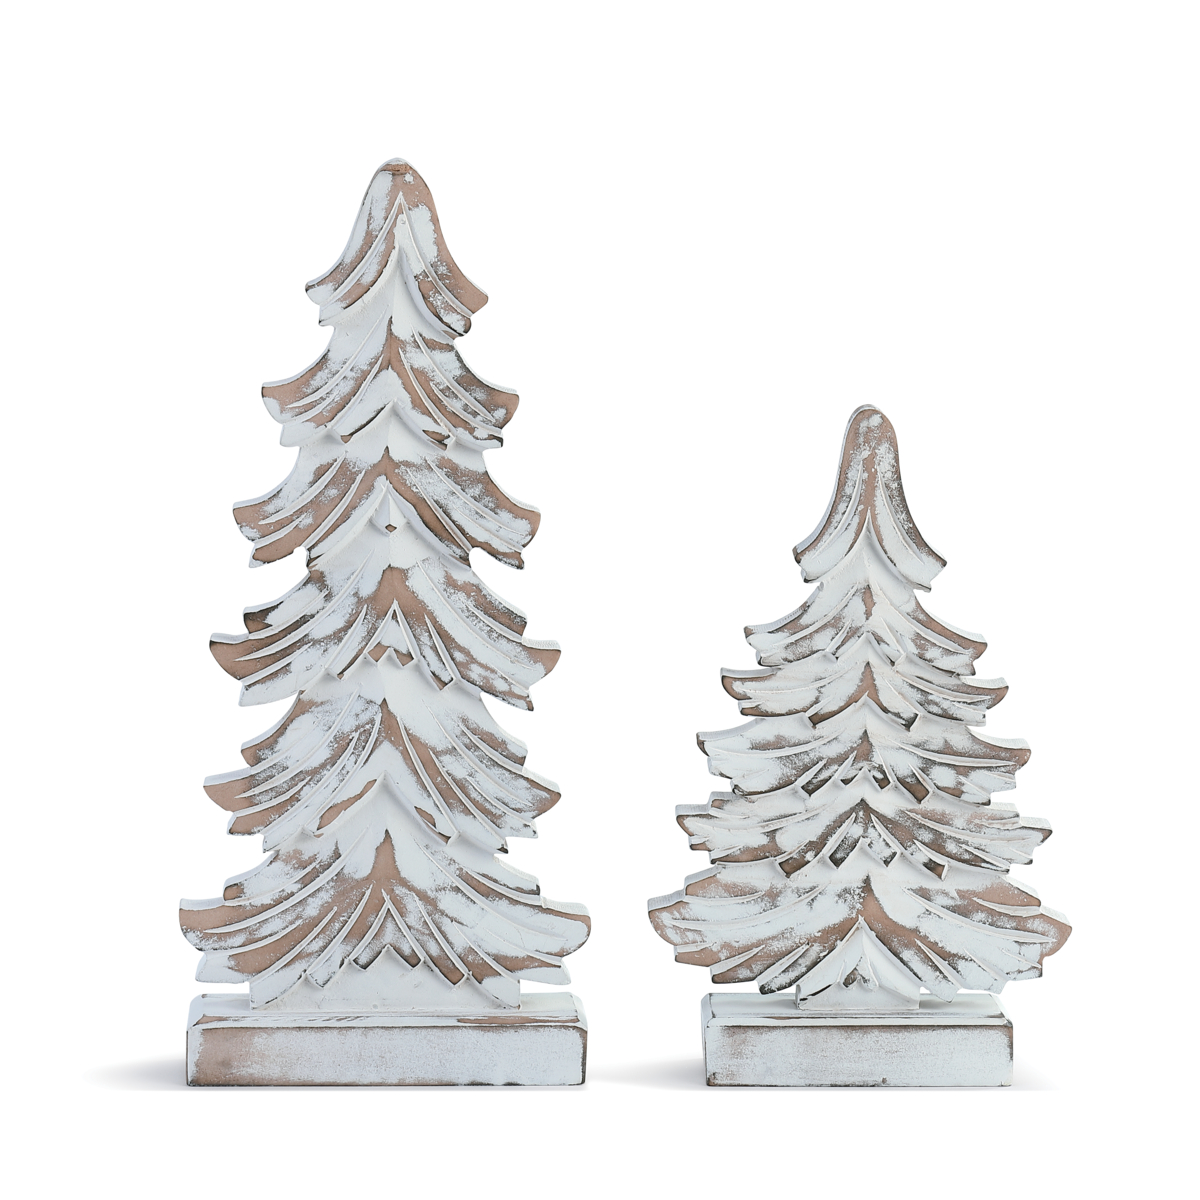 Whitewashed Wood Carved Trees